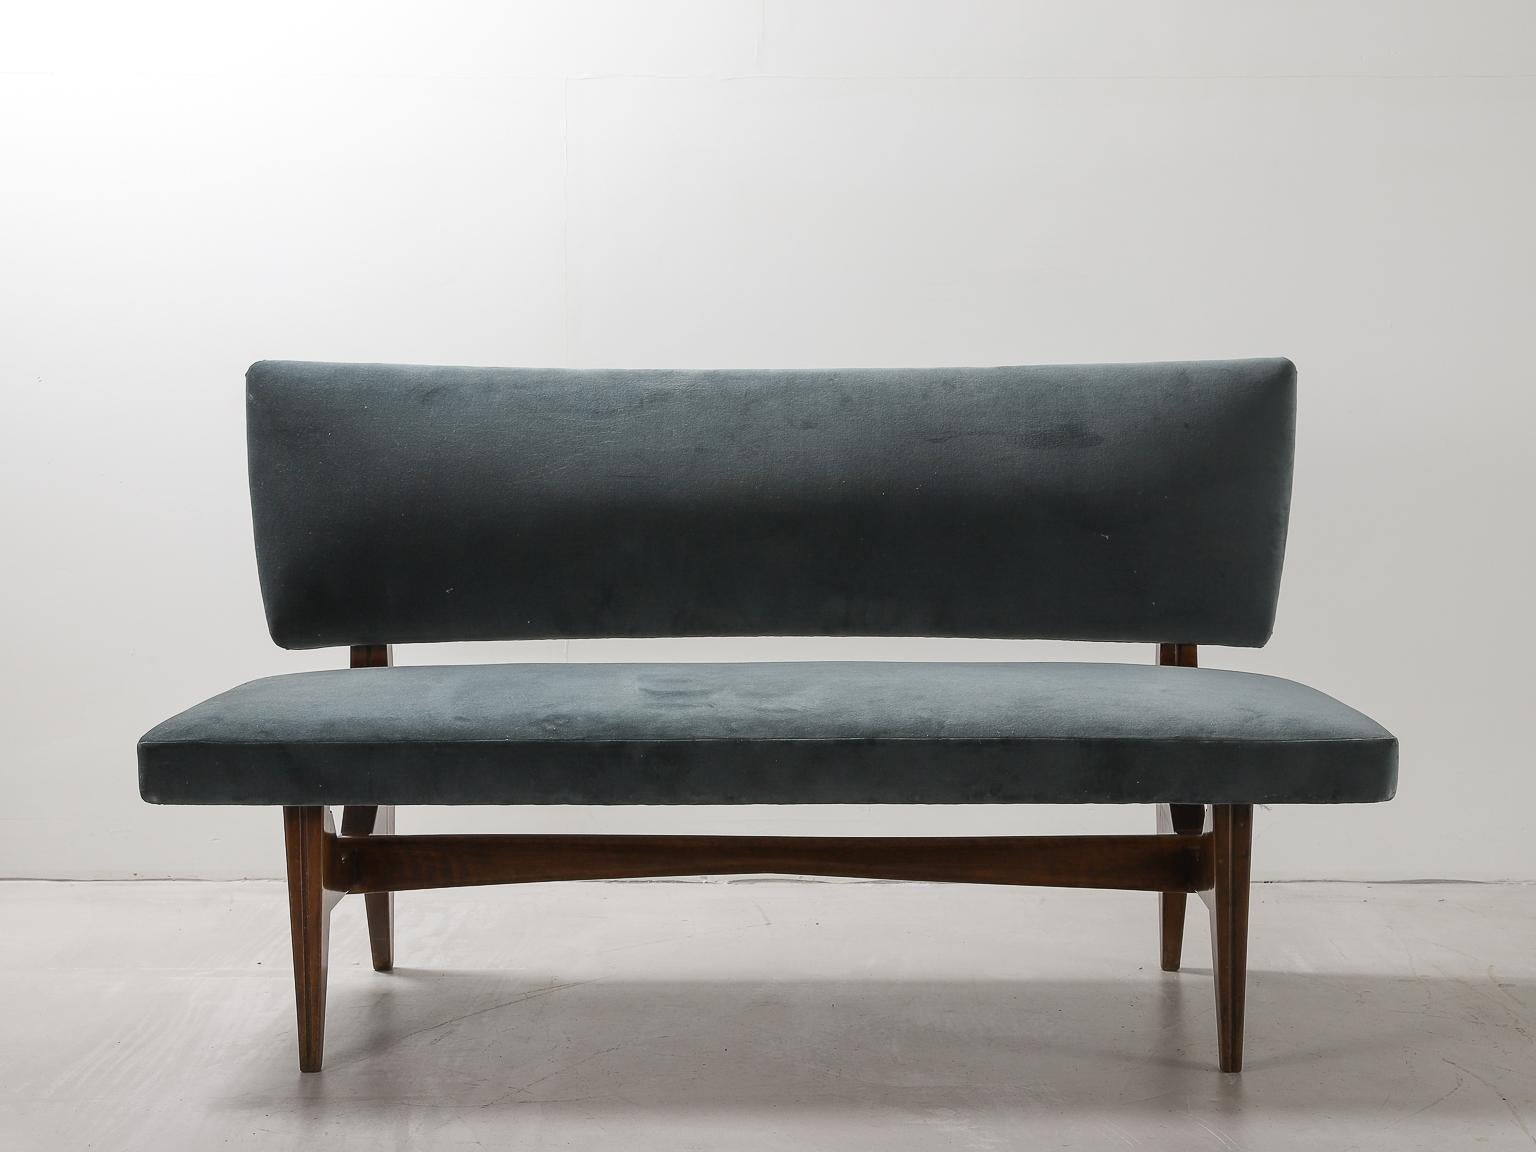 1950s Italian designed, Scuola Di Torino two seat sofa with wood frame and slate blue velvet upholstered seat and backrest.